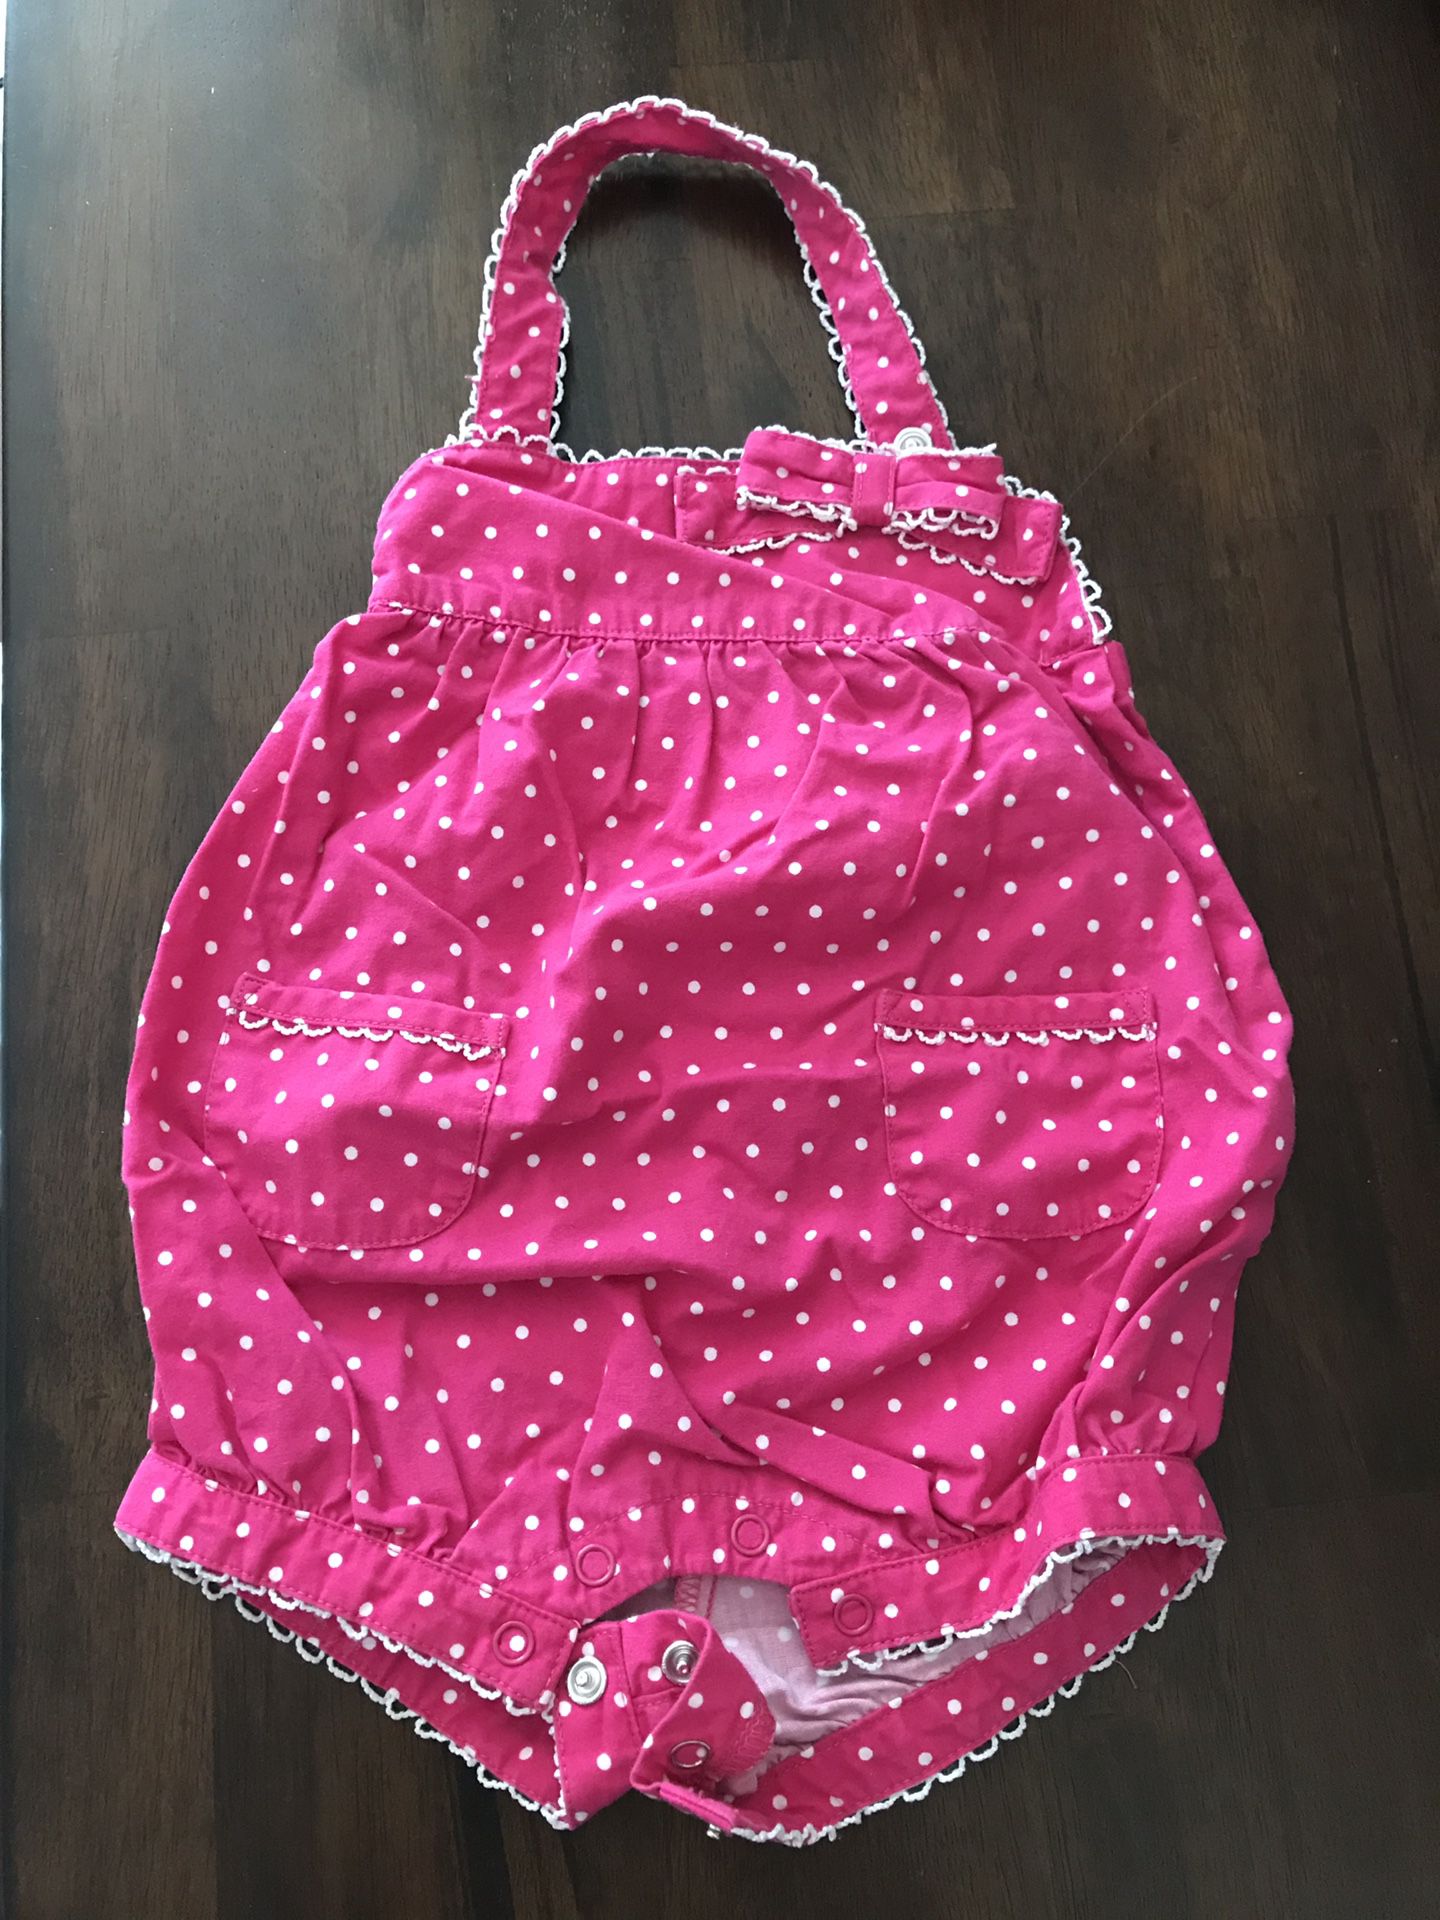 Baby Girl Clothes - Size 3-6 months - porch pickup near duck donuts in Herndon All items $1. Just tell me which ones you want.